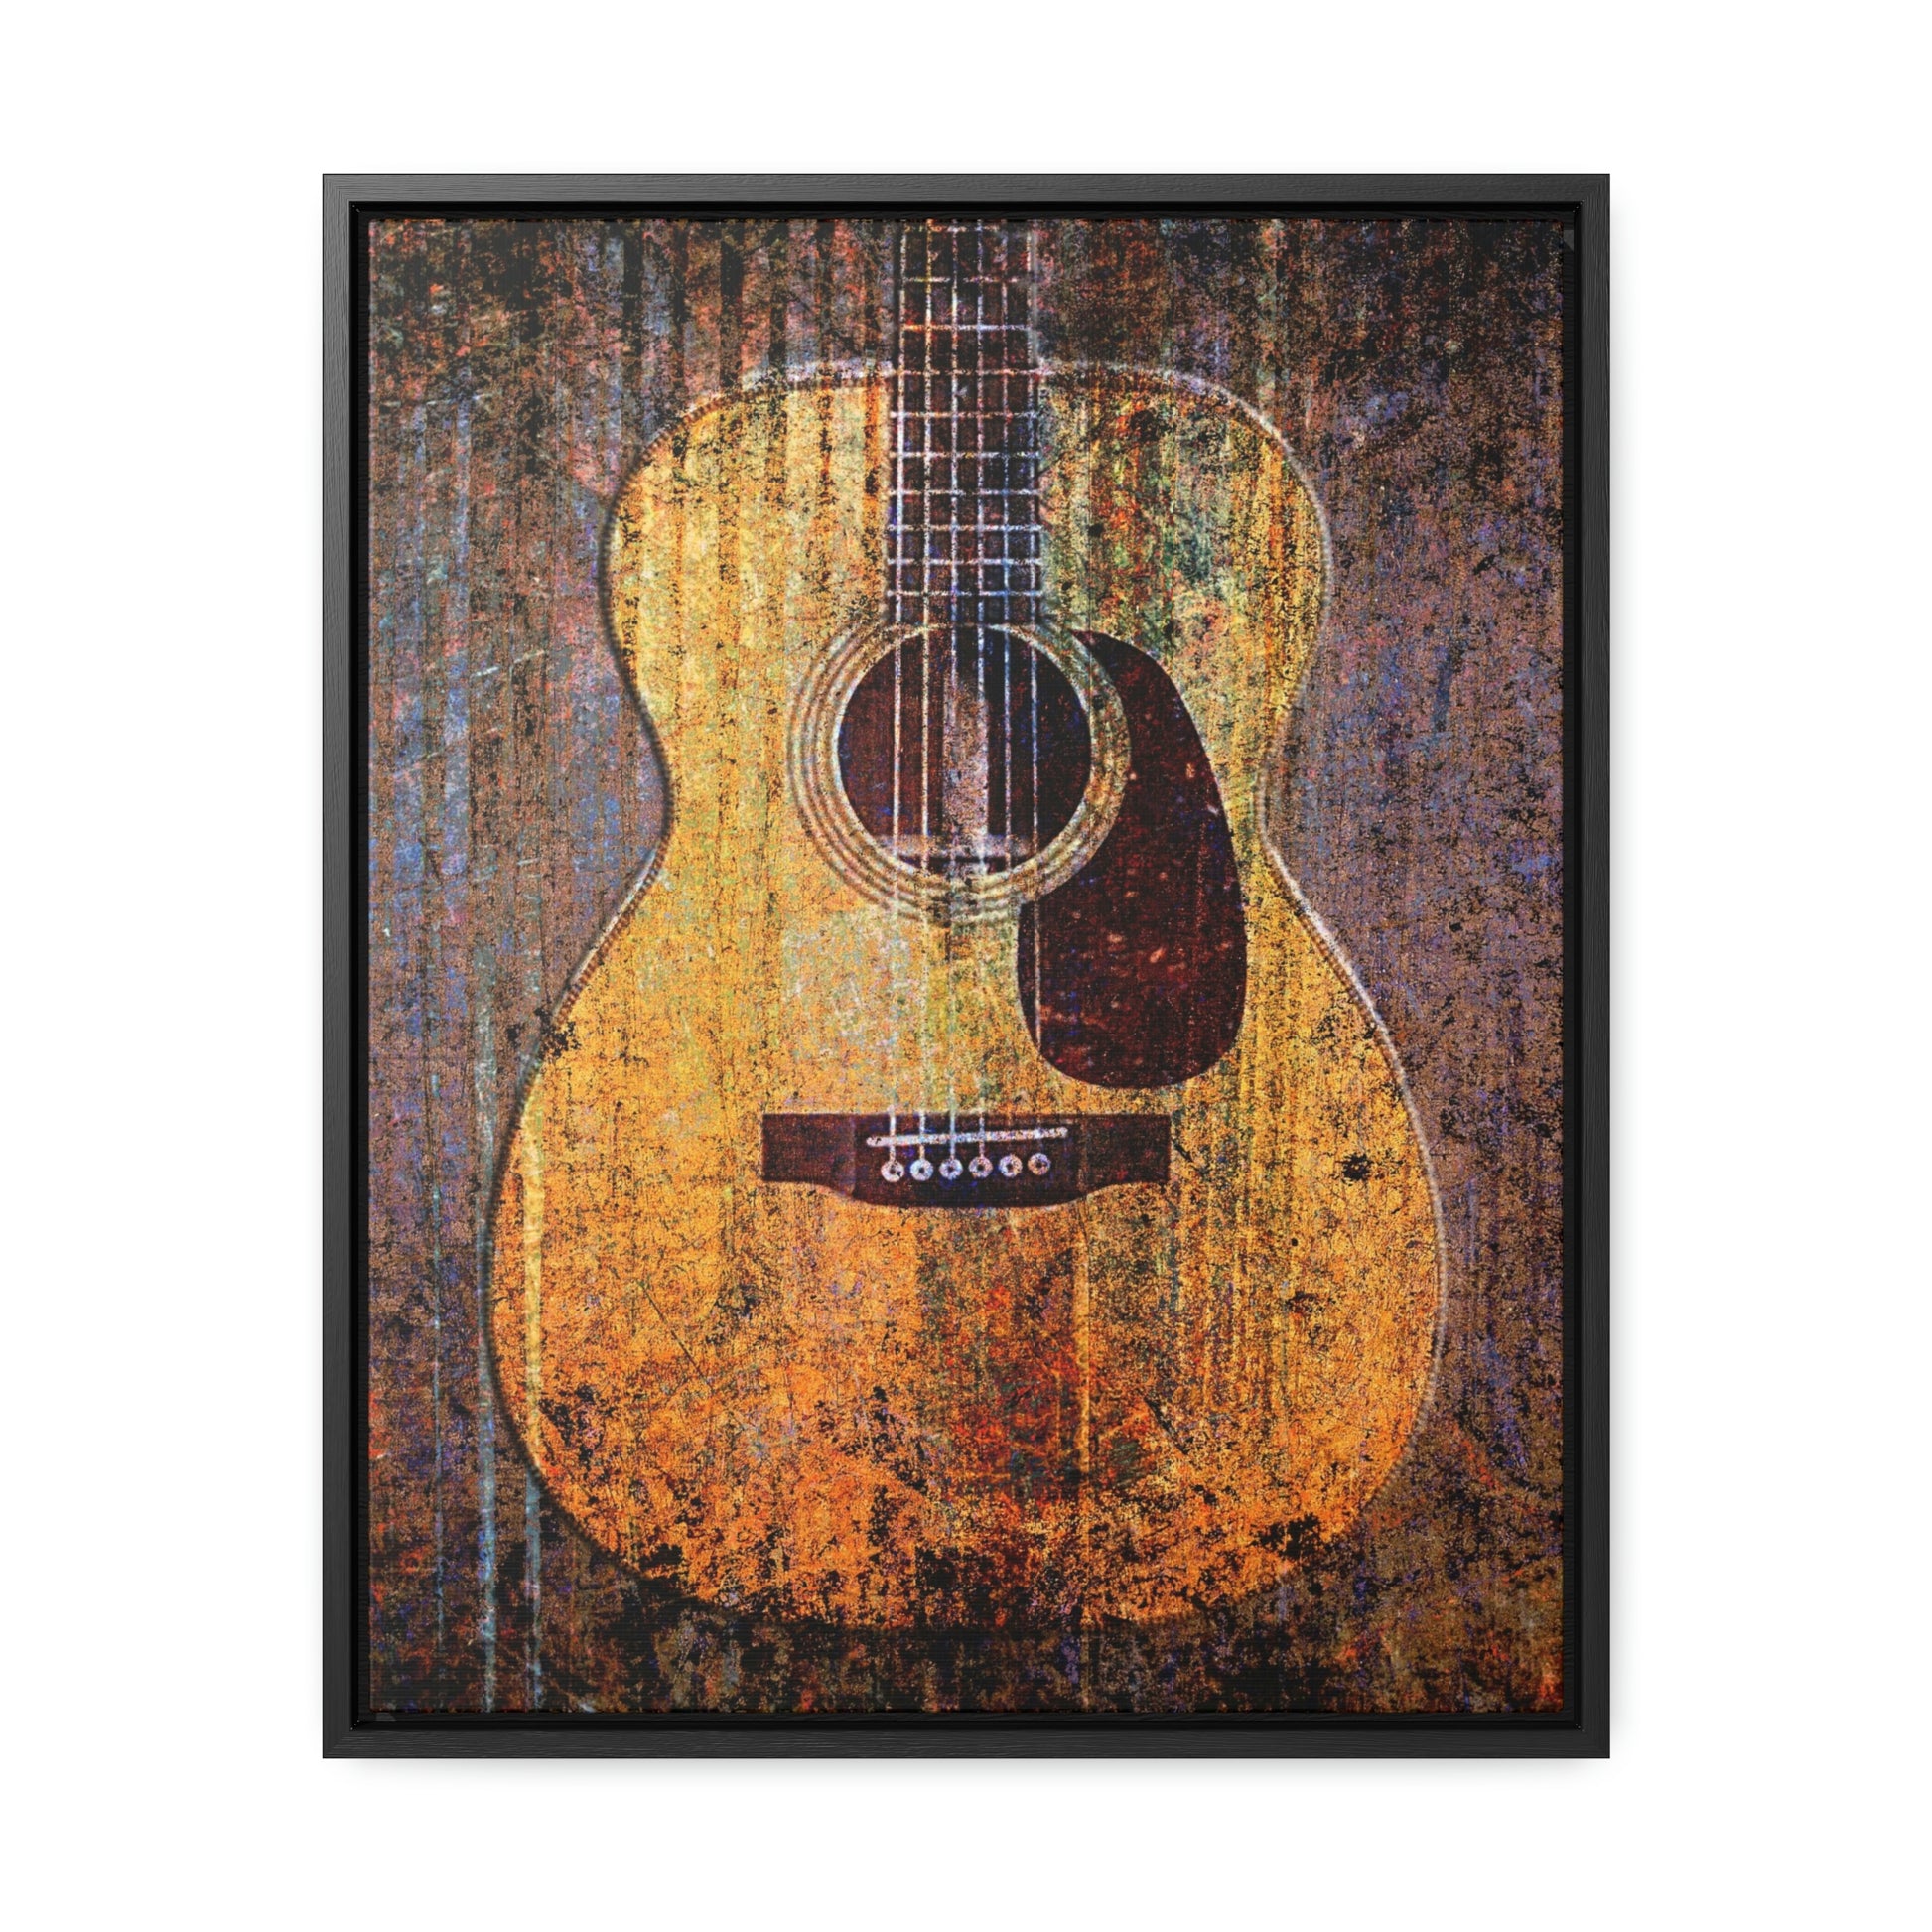  Acoustic Guitar Printed on Stretched Rectangular Canvas in a Black Floating Frame 5 sizes available